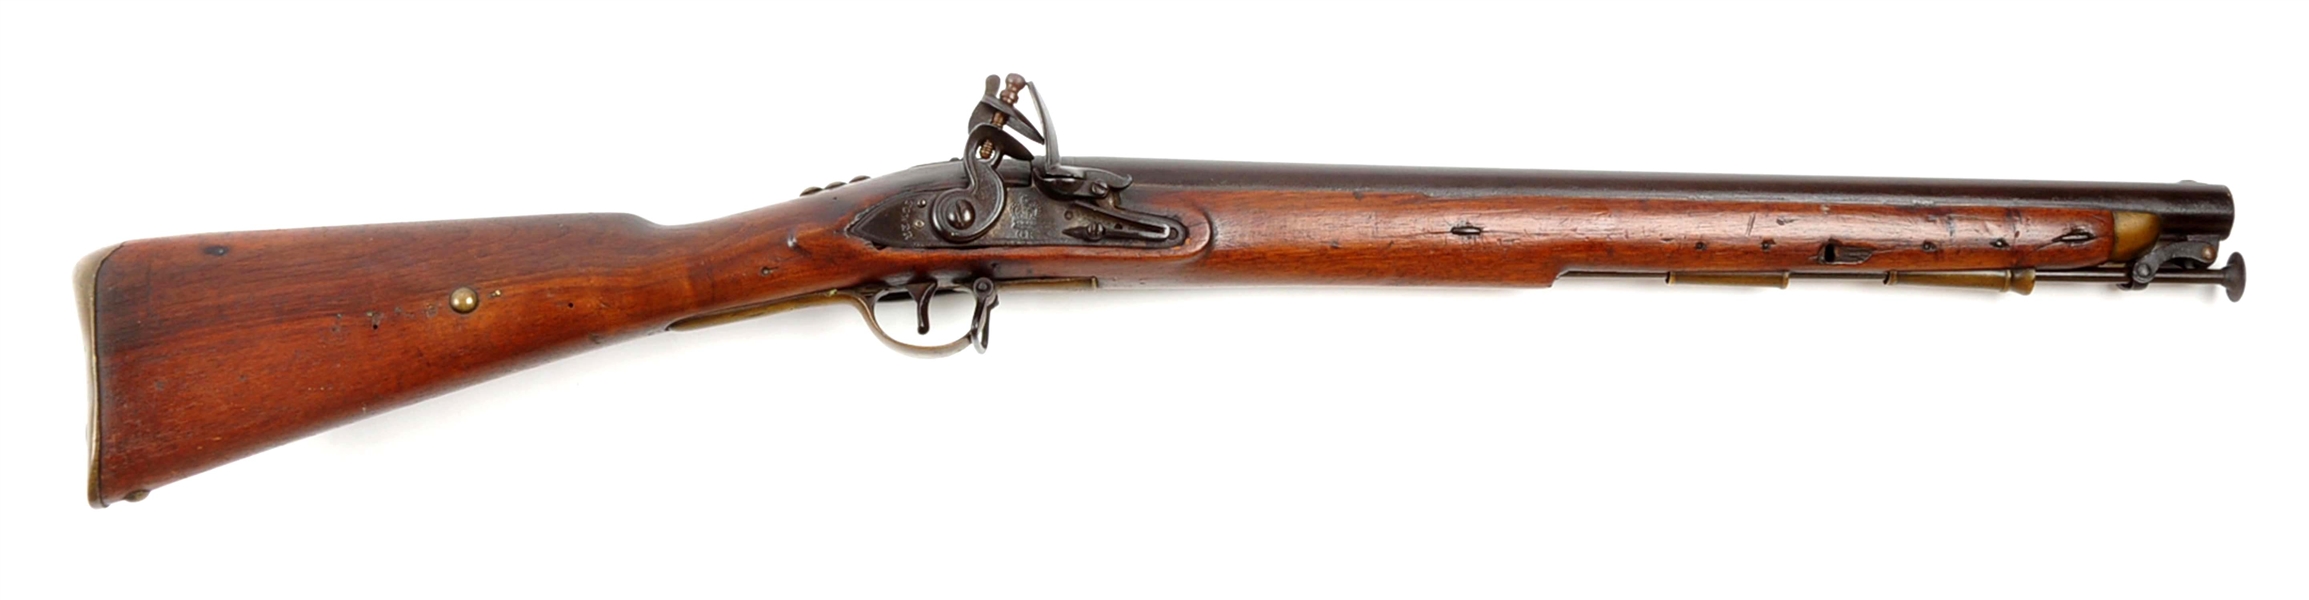 (A) LATE PRODUCTION FLINTLOCK PAGET CARBINE.